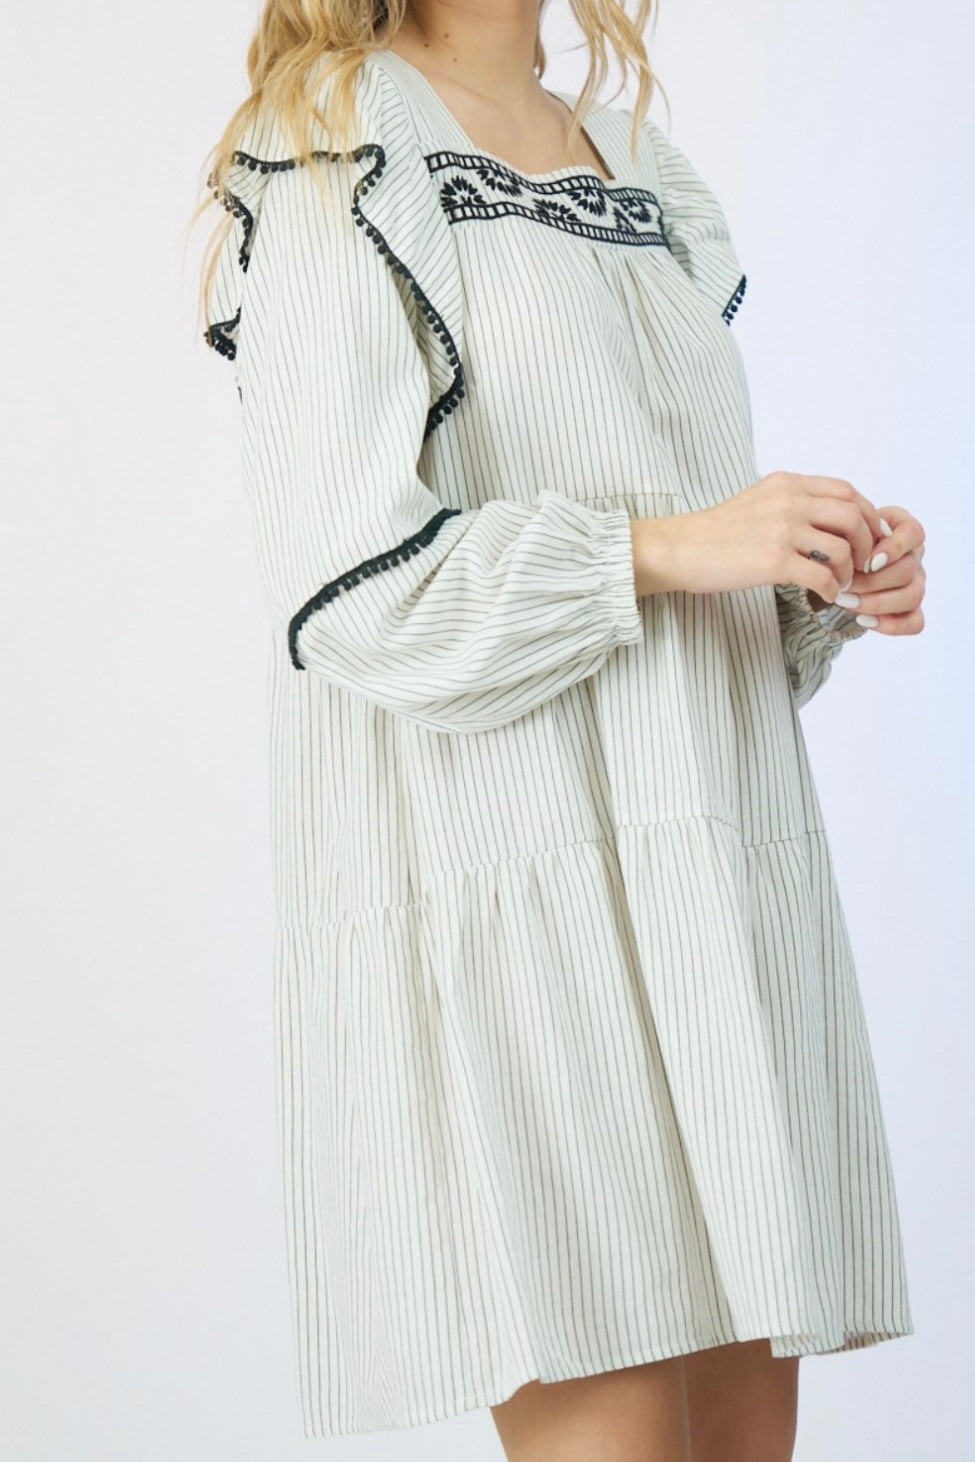 LONG SLEEVE PEASANT STYLE TIERED DRESS